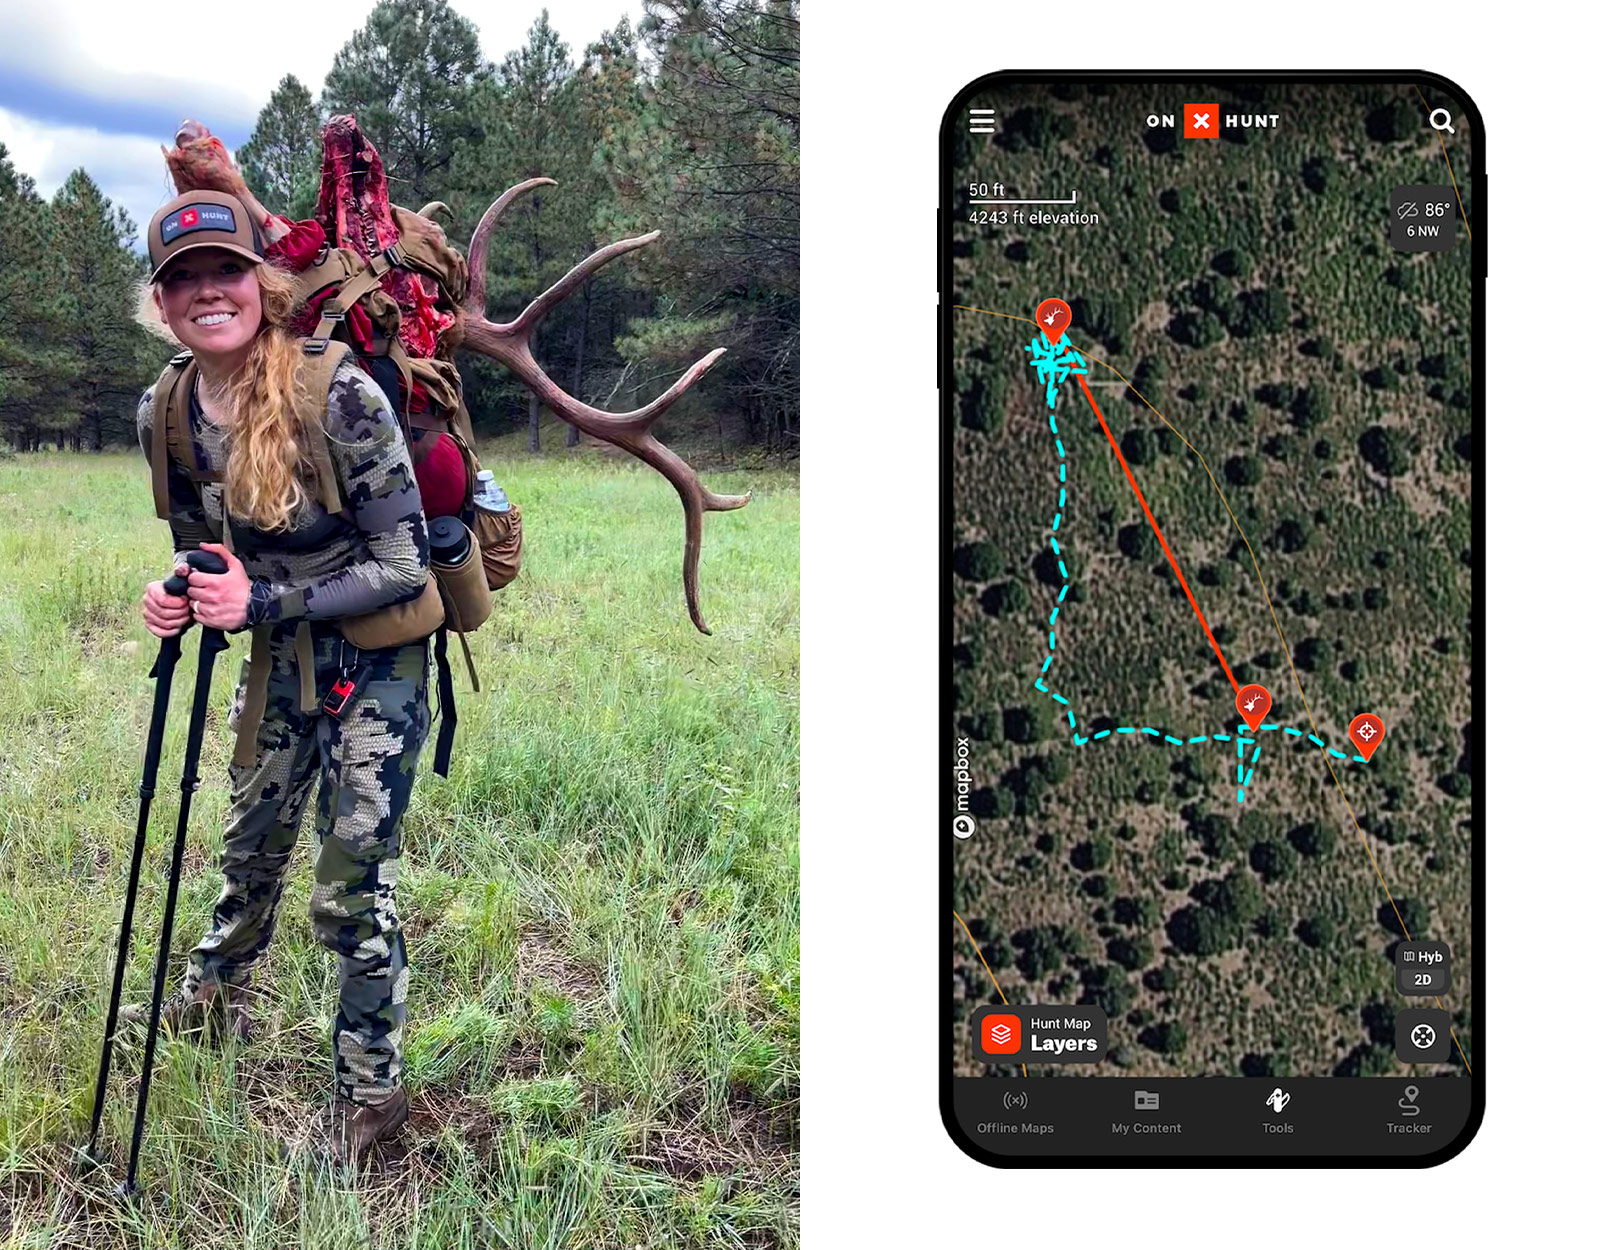 tracker tool used on map while hunting